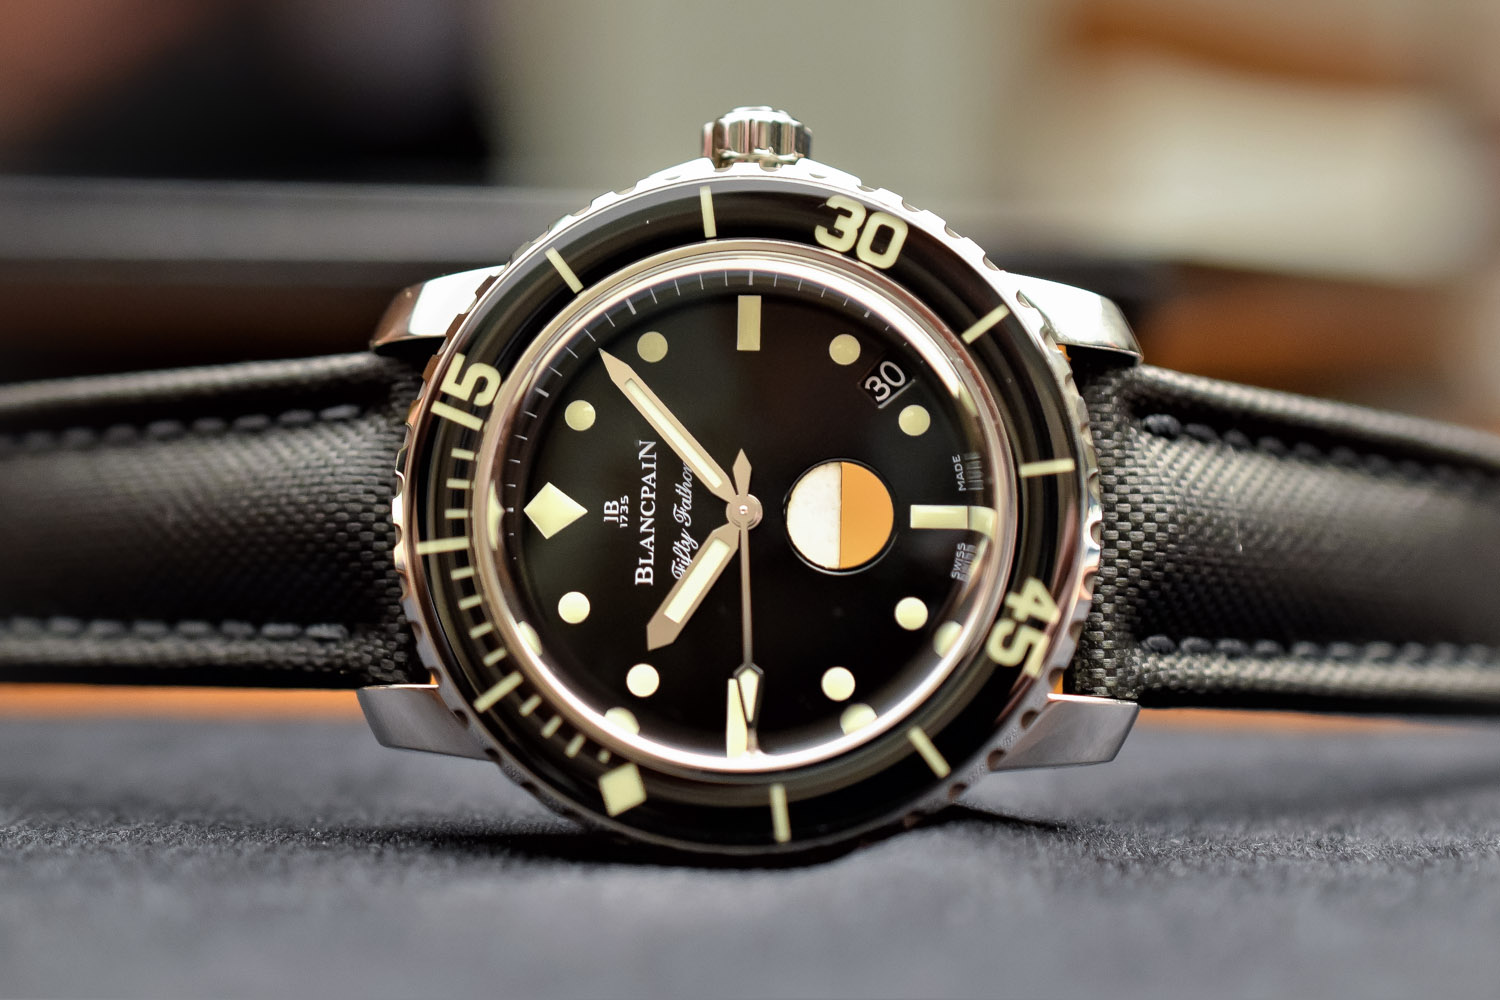 Blancpain Tribute To Fifty Fathoms MIL-SPEC - Baselworld 2017